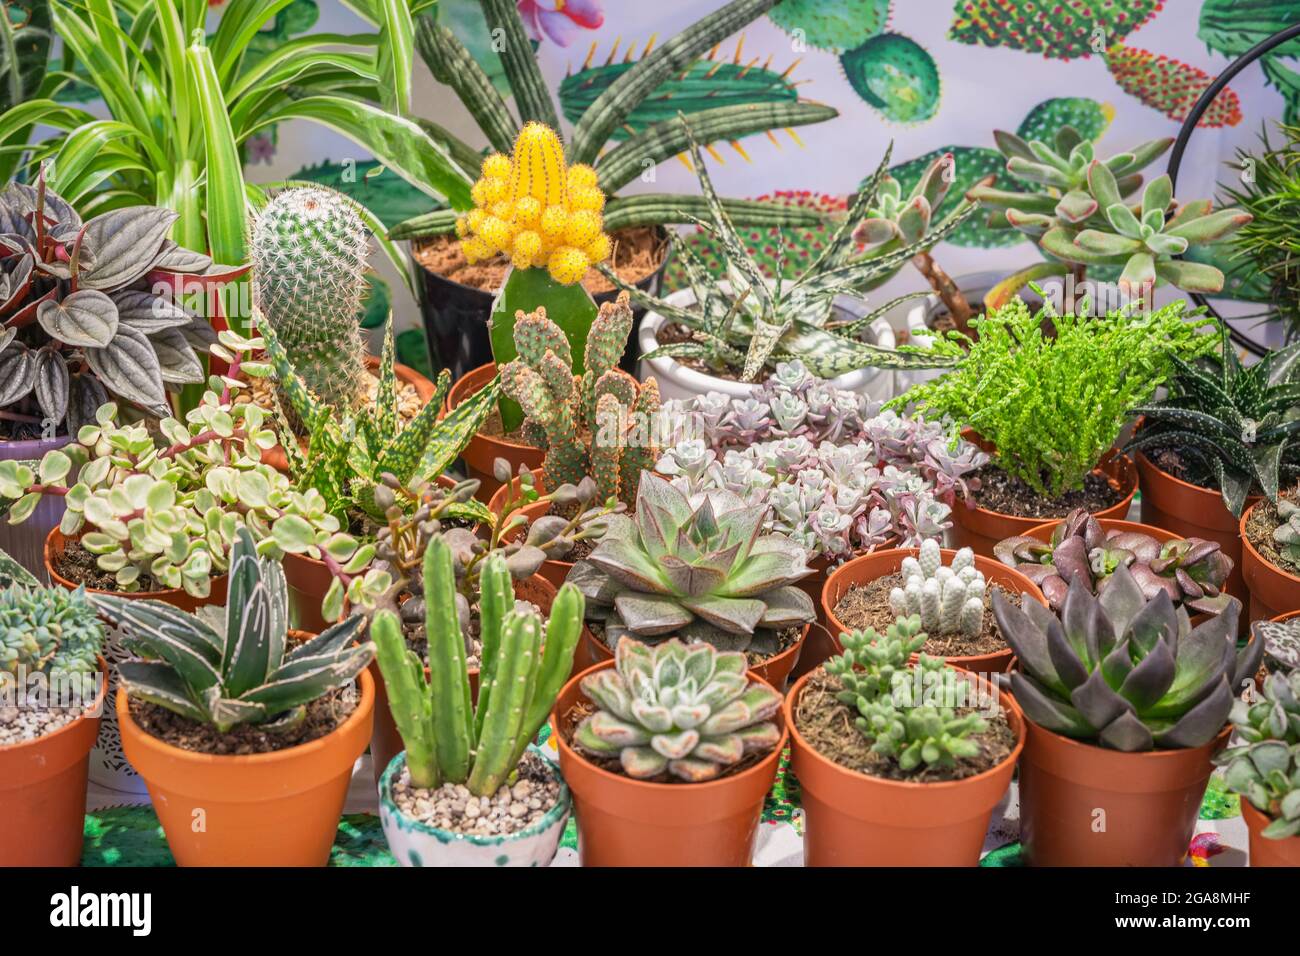 Collection of various multicolored cacti and succulents plants. Succulent garden at home, hobby concept. Stock Photo